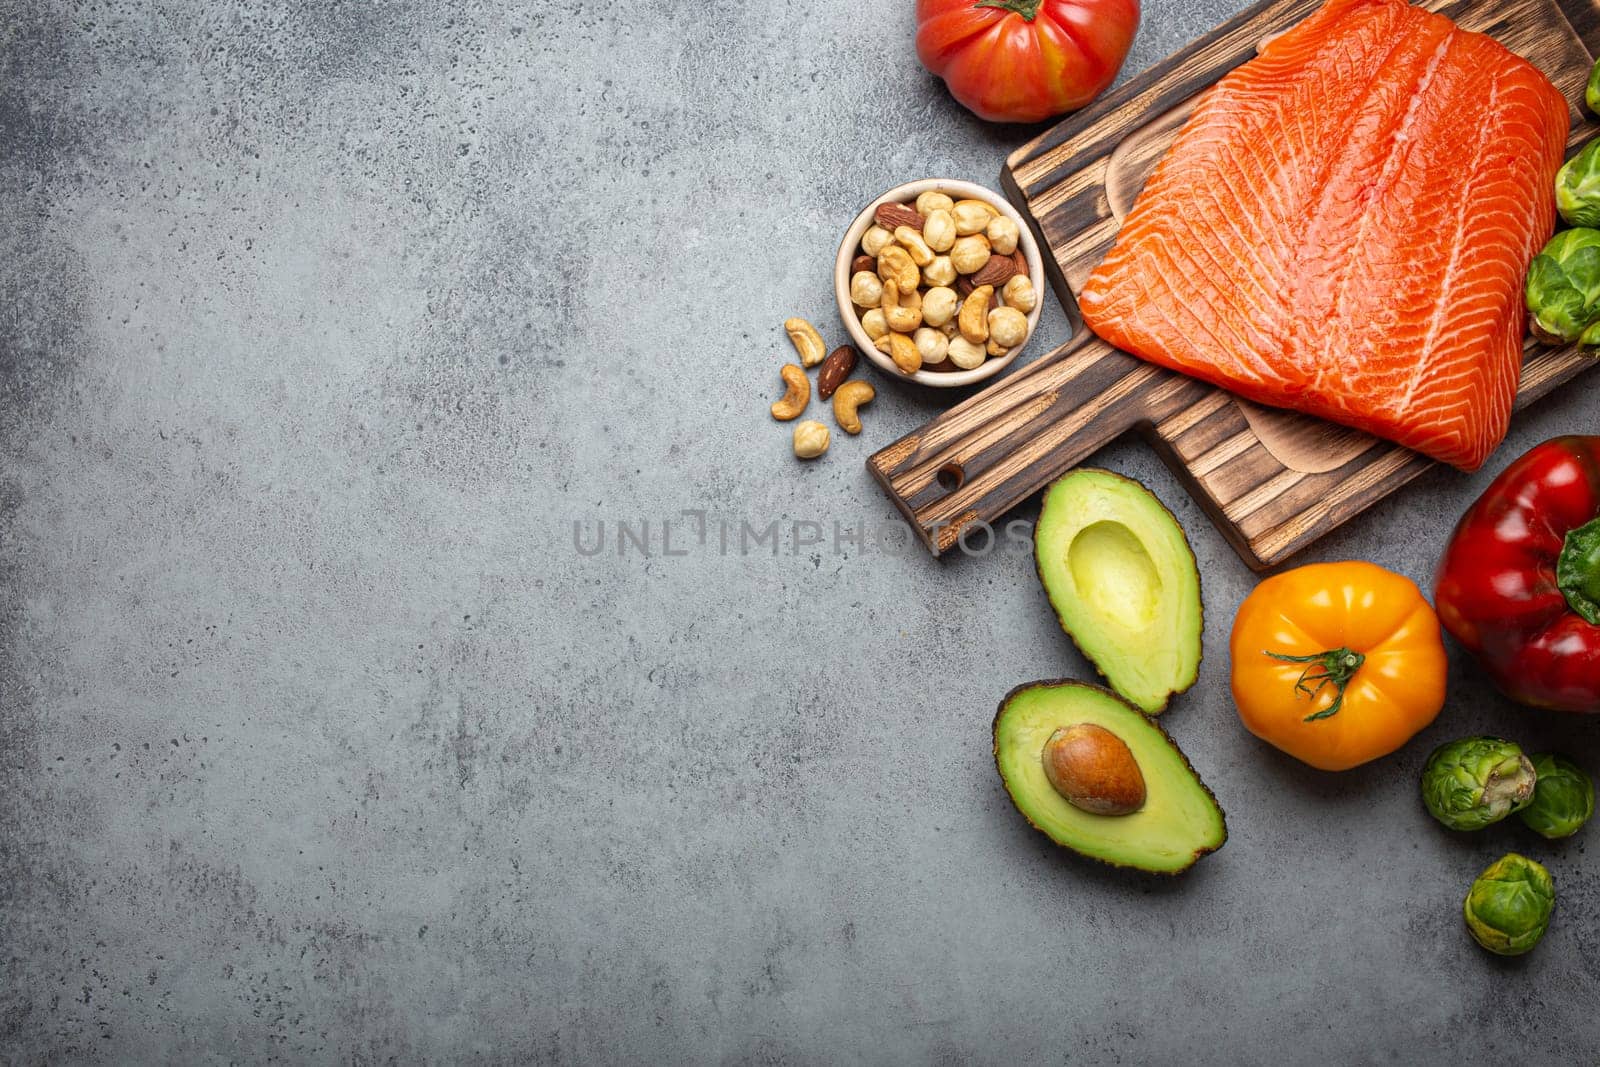 Fresh raw salmon fillet on wooden cutting board, organic bio vegetables and nuts on rustic stone grey background top view. Ingredients full of vitamins for healthy diet and nutrition, space for text